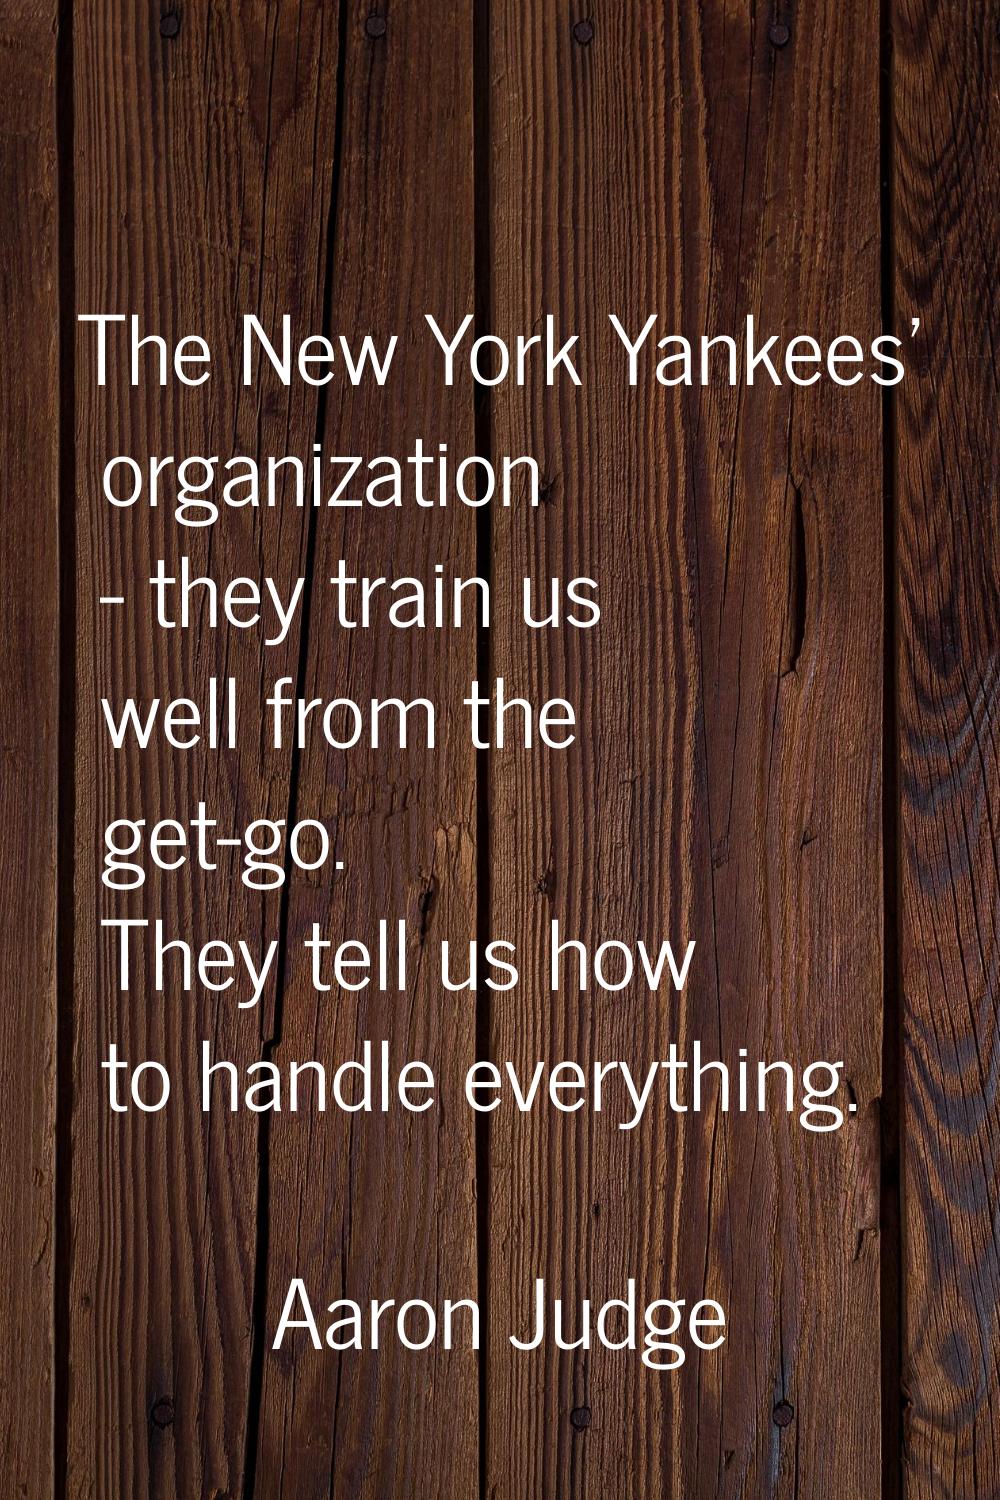 The New York Yankees' organization - they train us well from the get-go. They tell us how to handle